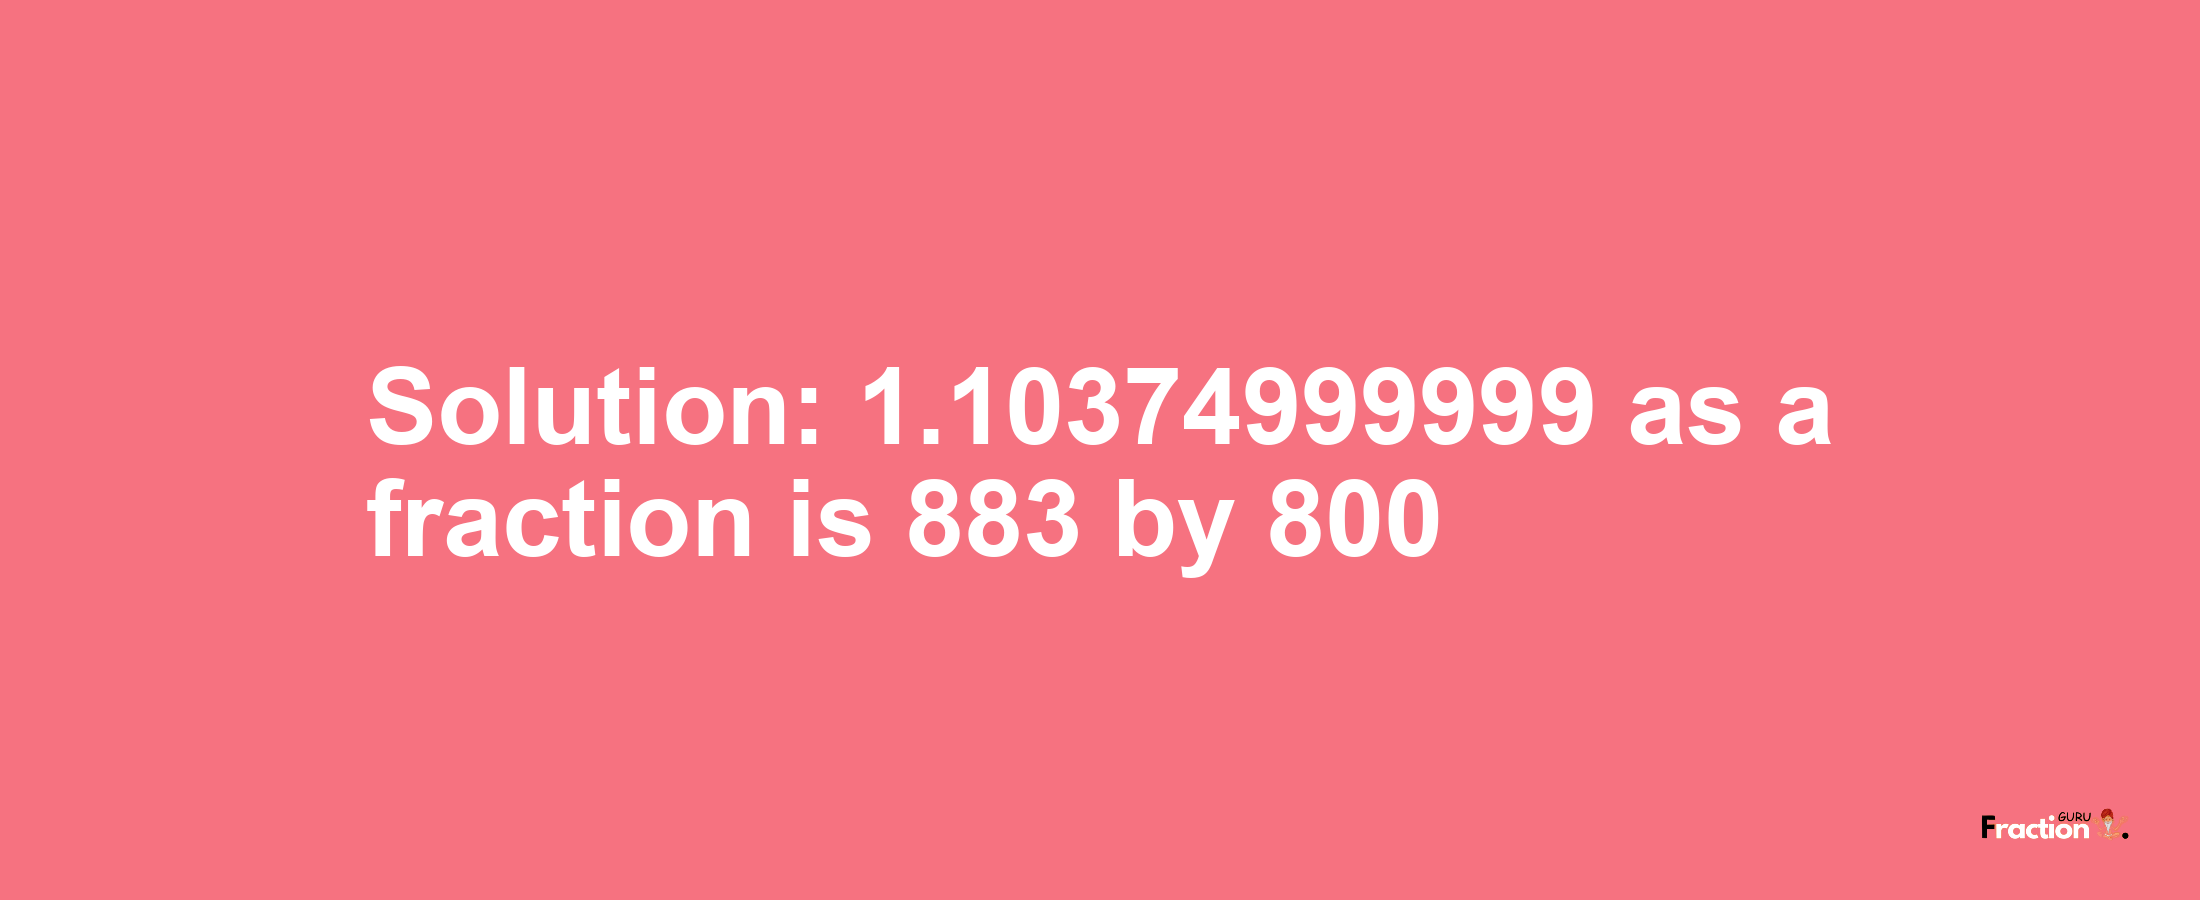 Solution:1.10374999999 as a fraction is 883/800